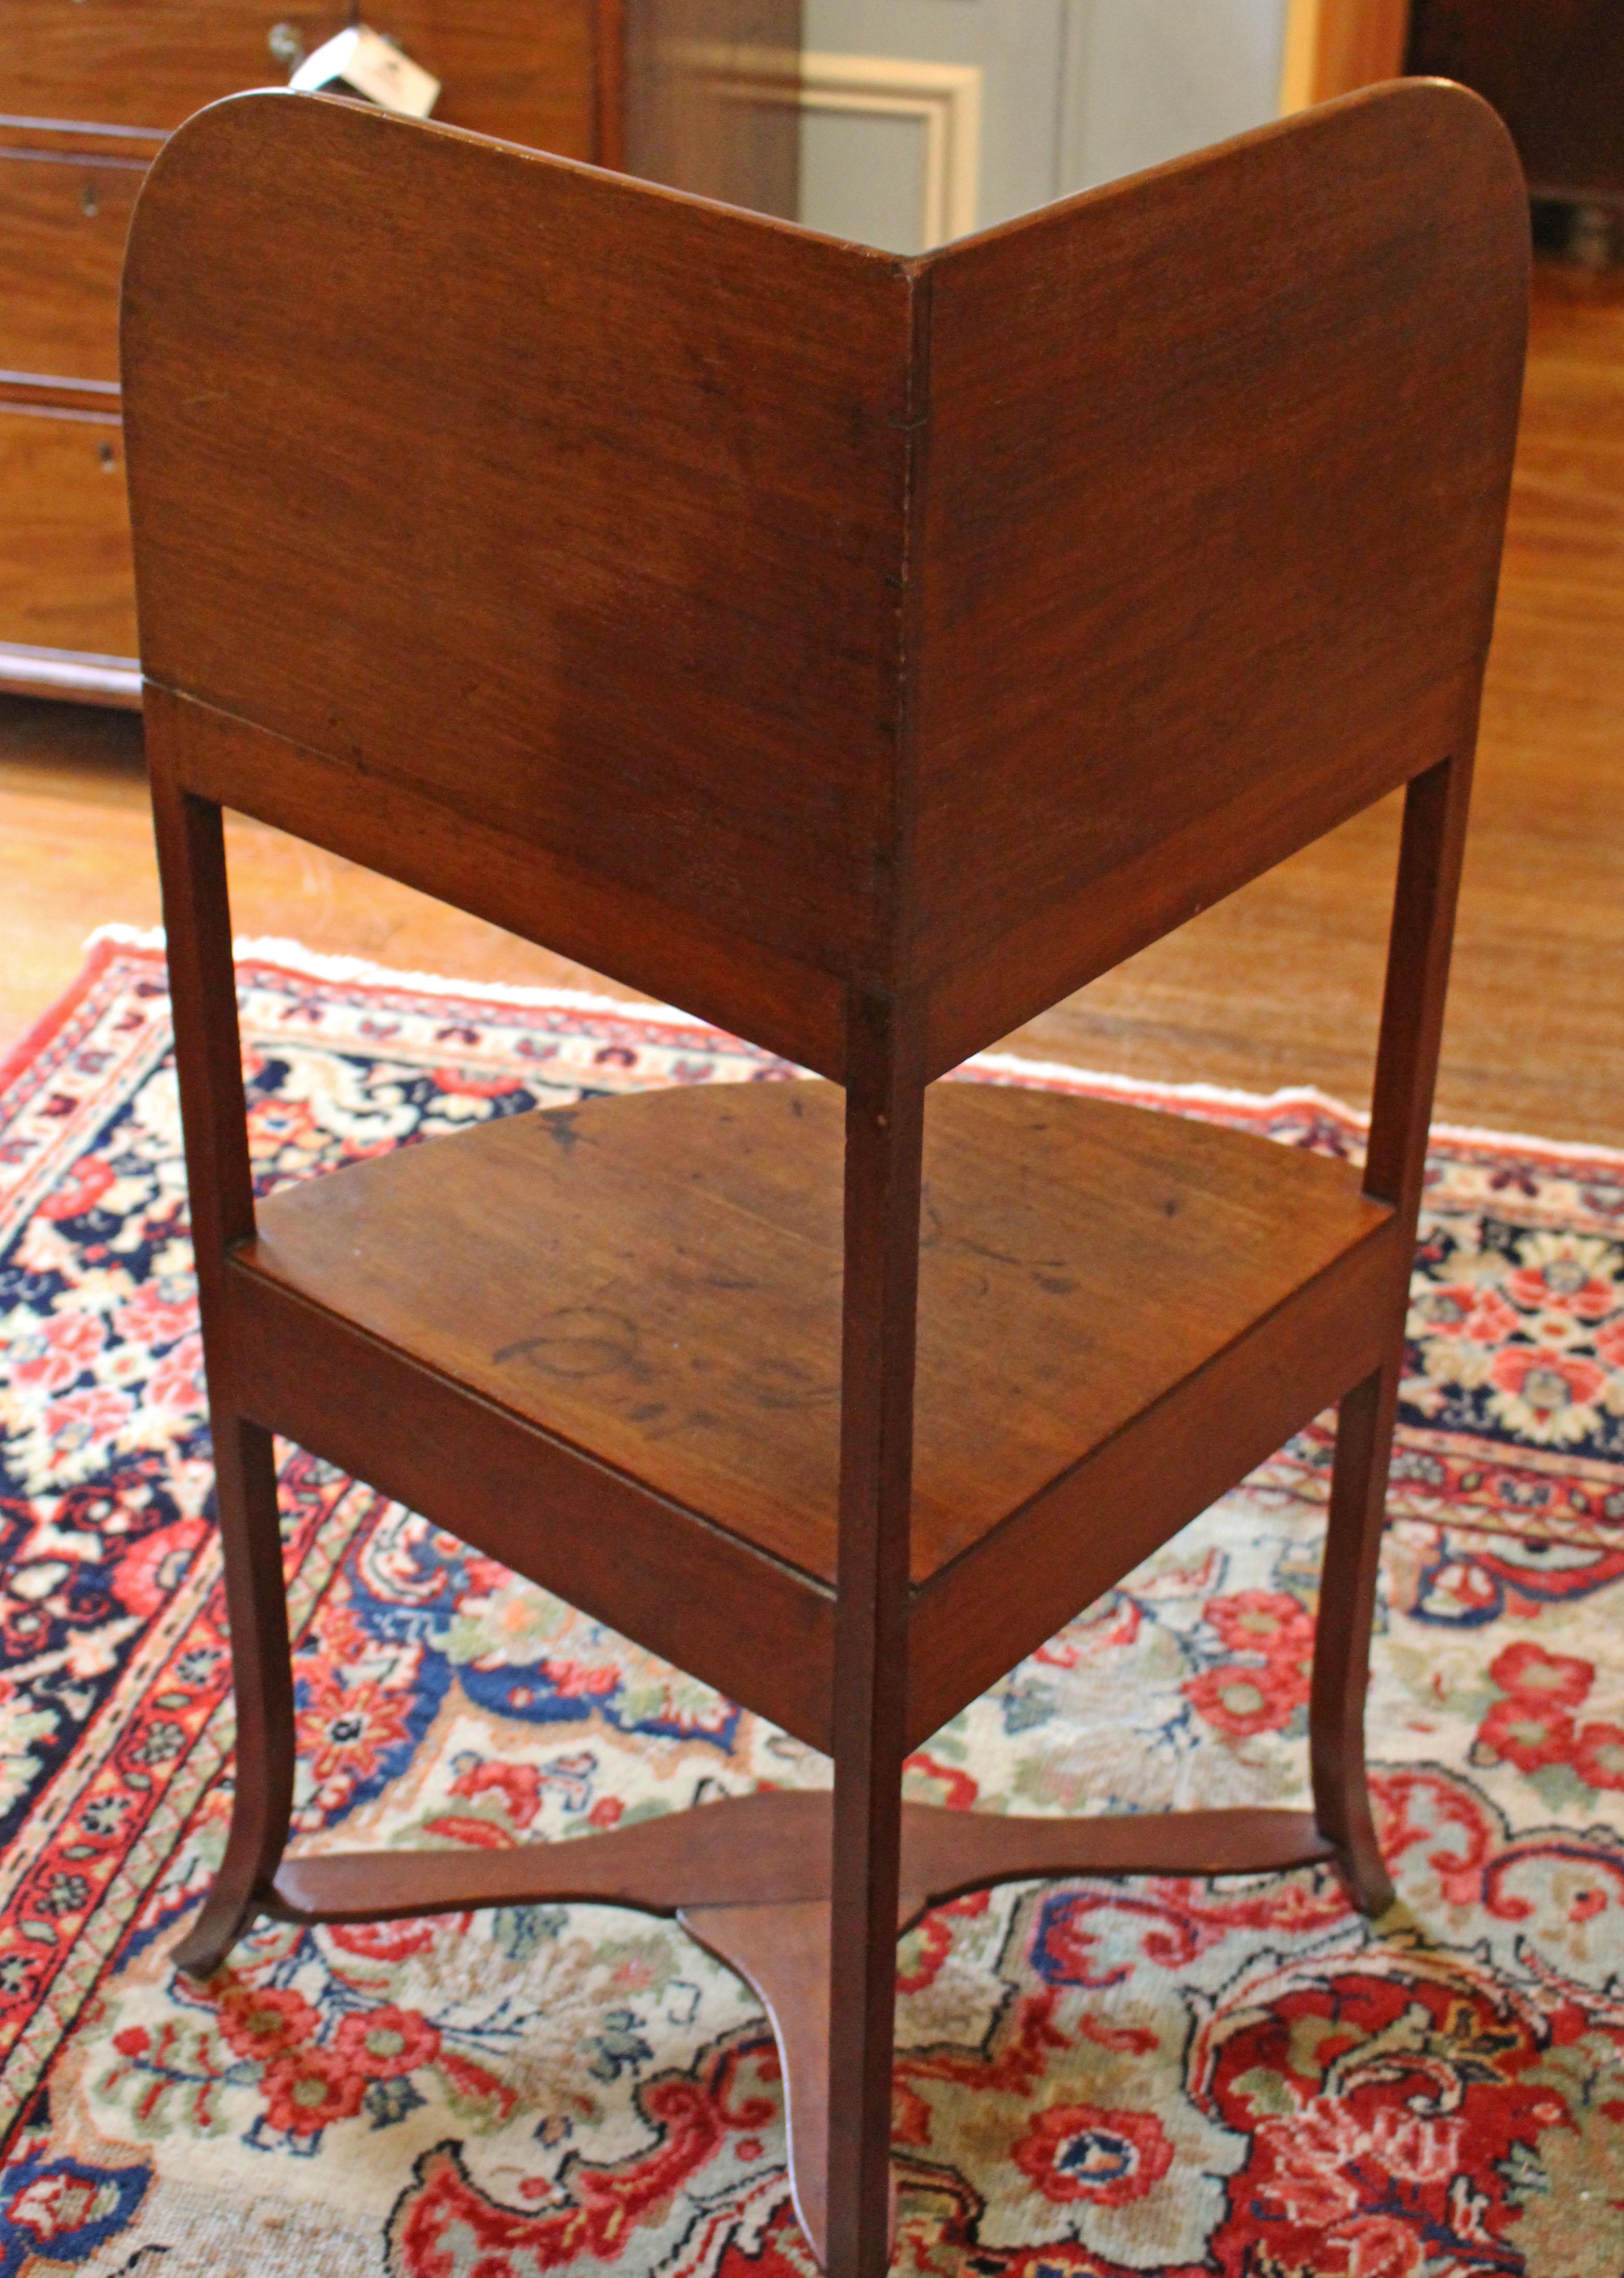 Circa 1800 George III Mahogany Corner Washstand In Good Condition For Sale In Chapel Hill, NC